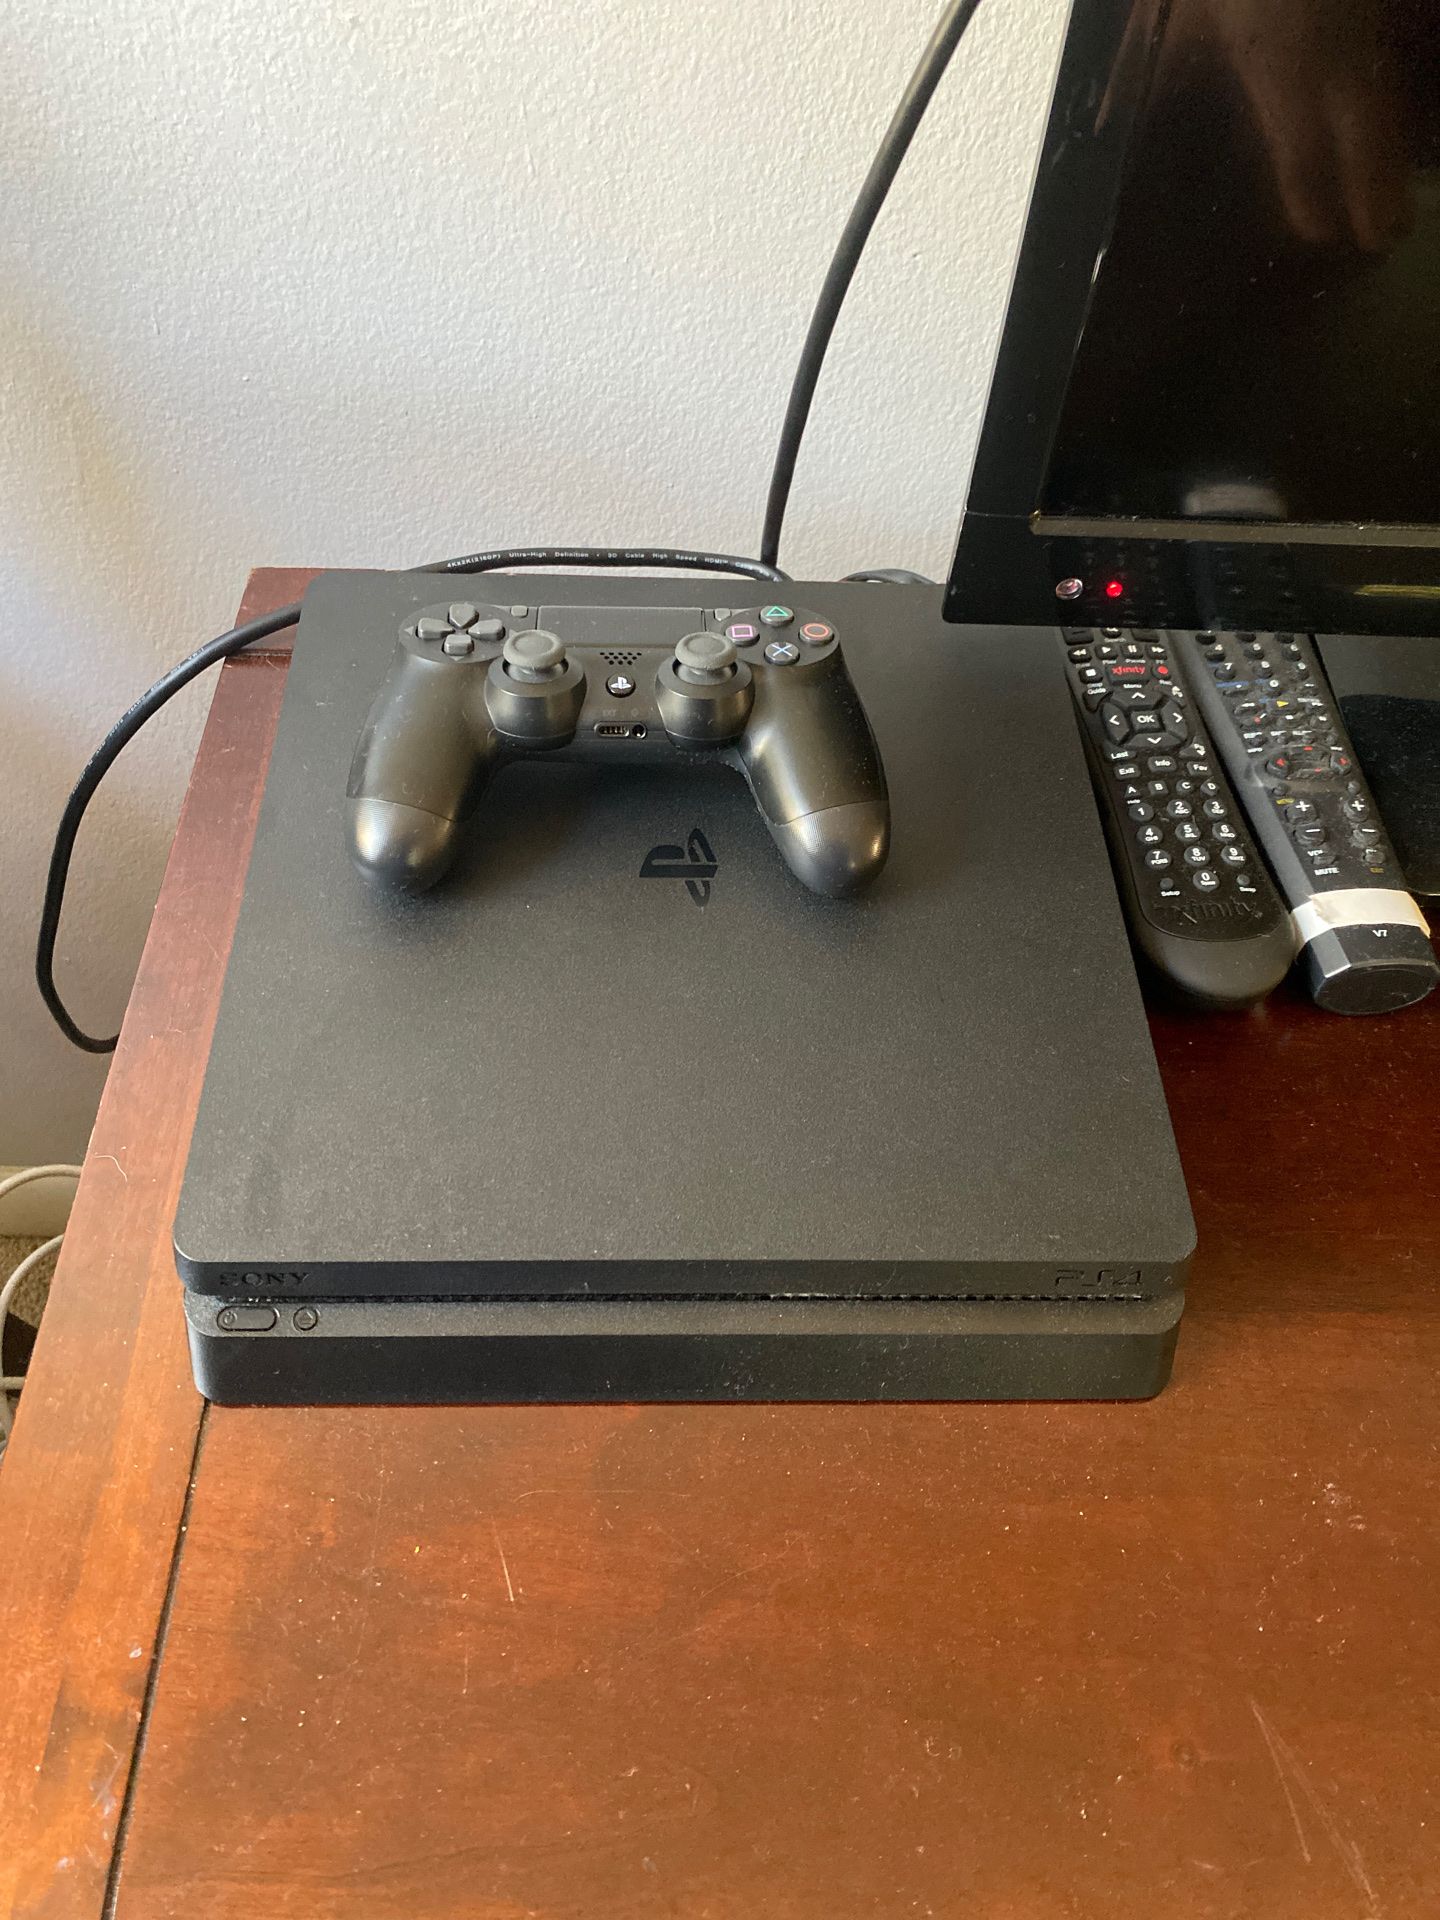 PlayStation 4 for the low